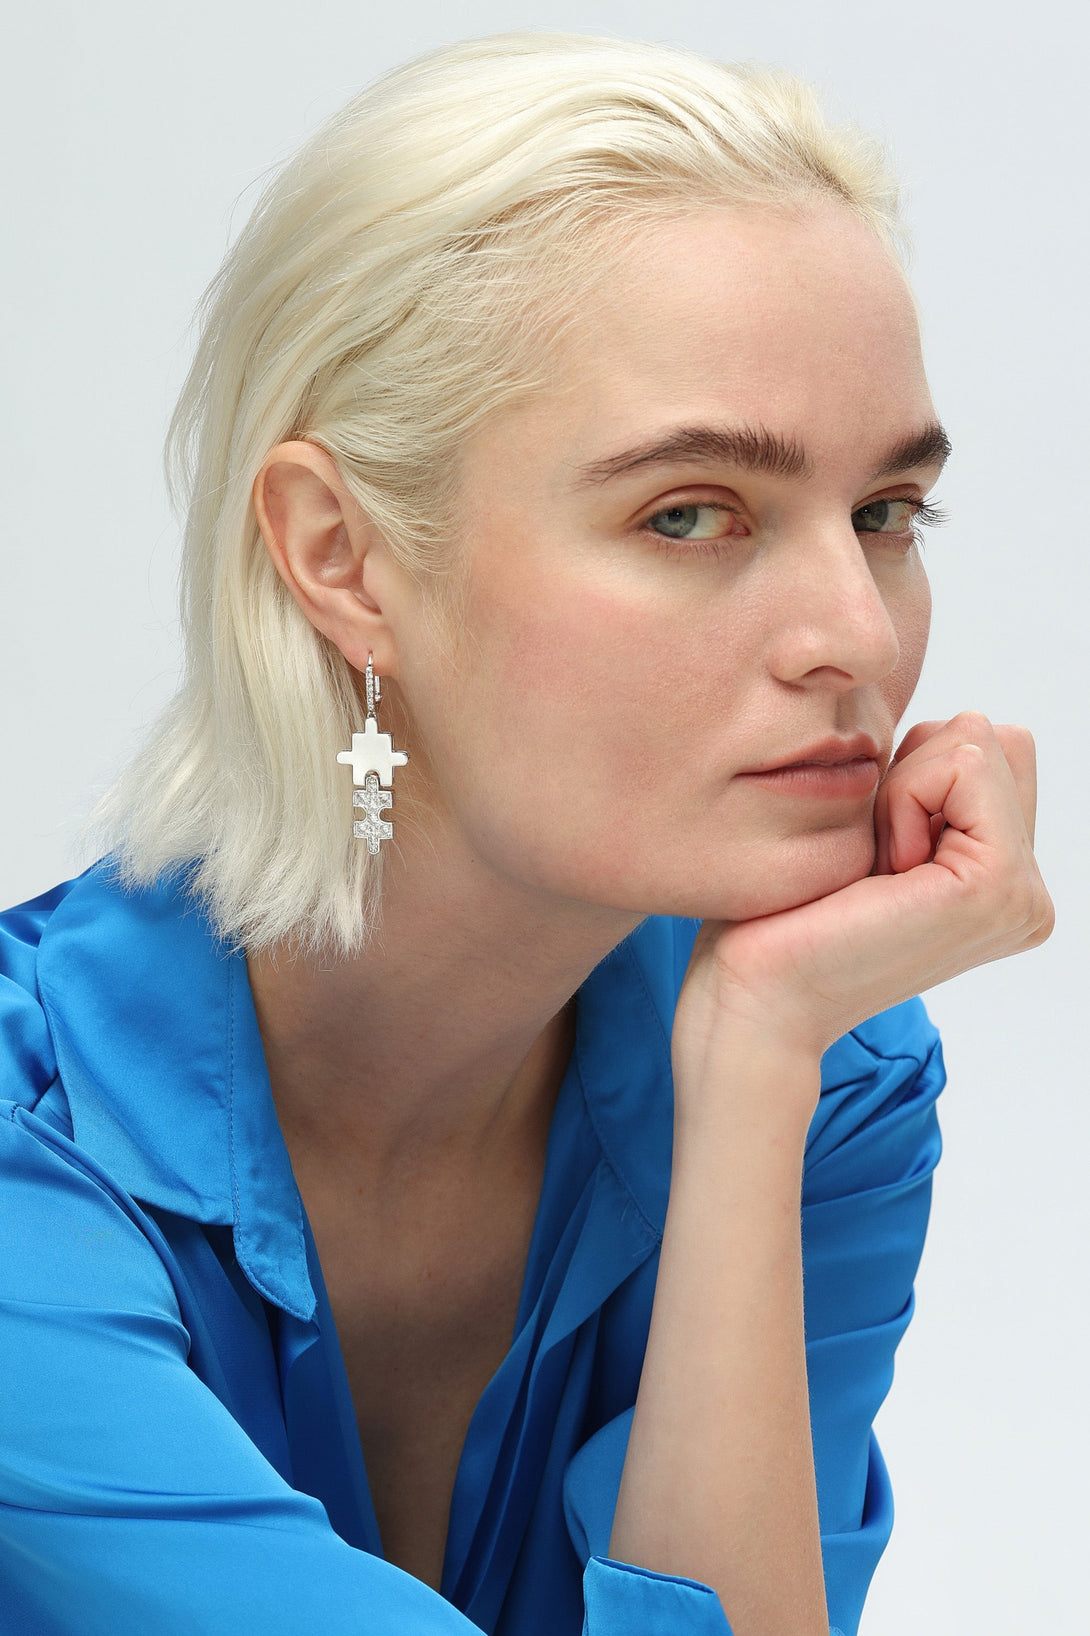 Silver Jigsaw Puzzle Drop Earrings - Classicharms